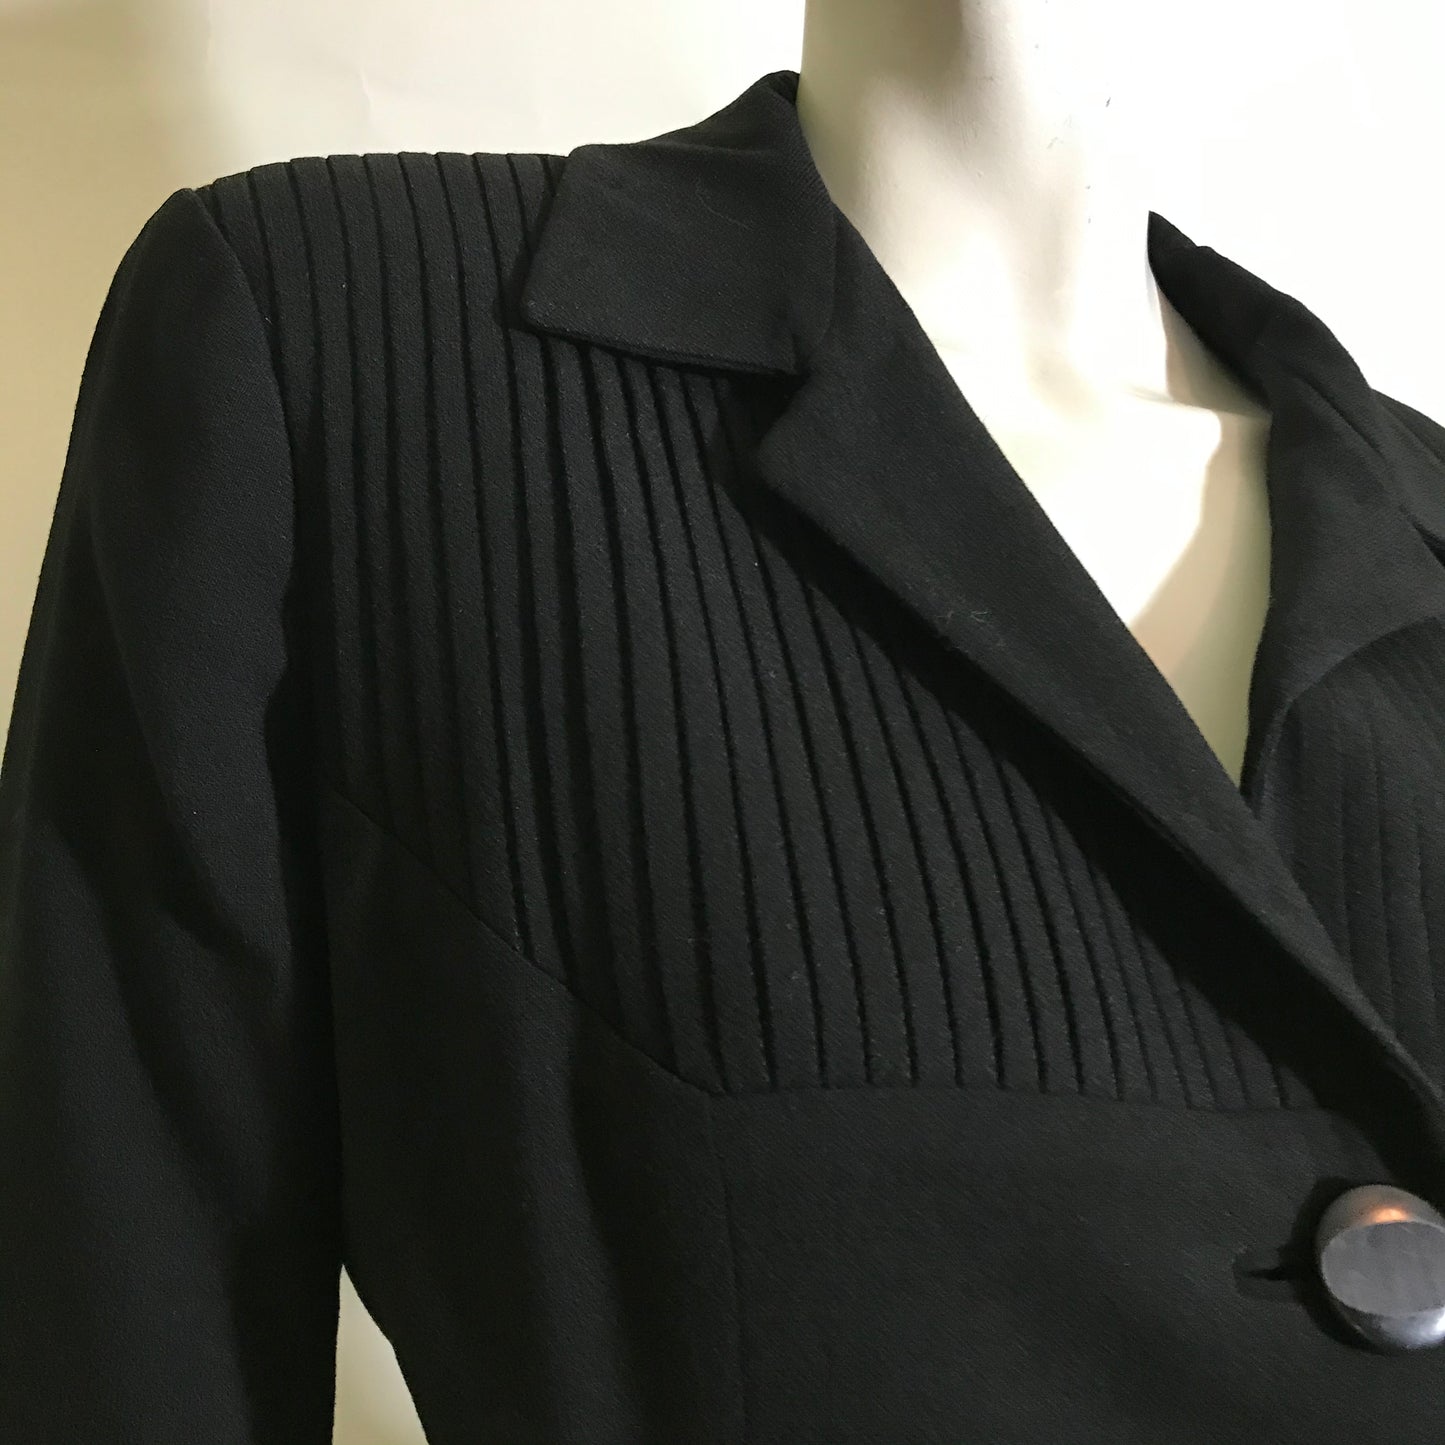 Black Wool Classic Suit with Pleated Accents circa 1950s